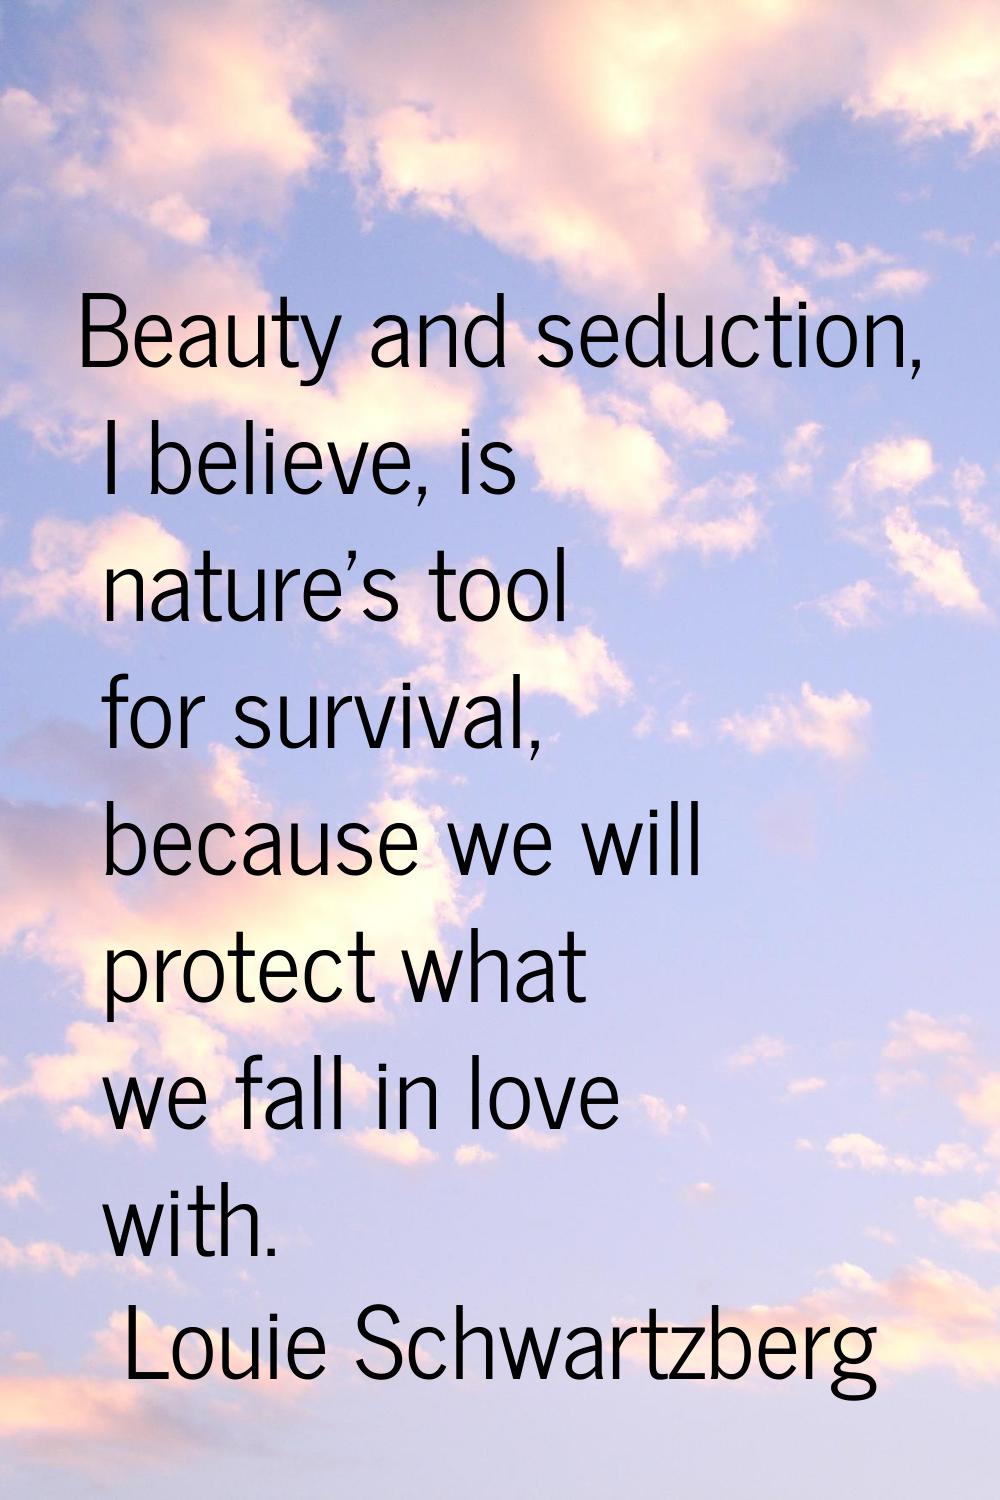 Beauty and seduction, I believe, is nature's tool for survival, because we will protect what we fal